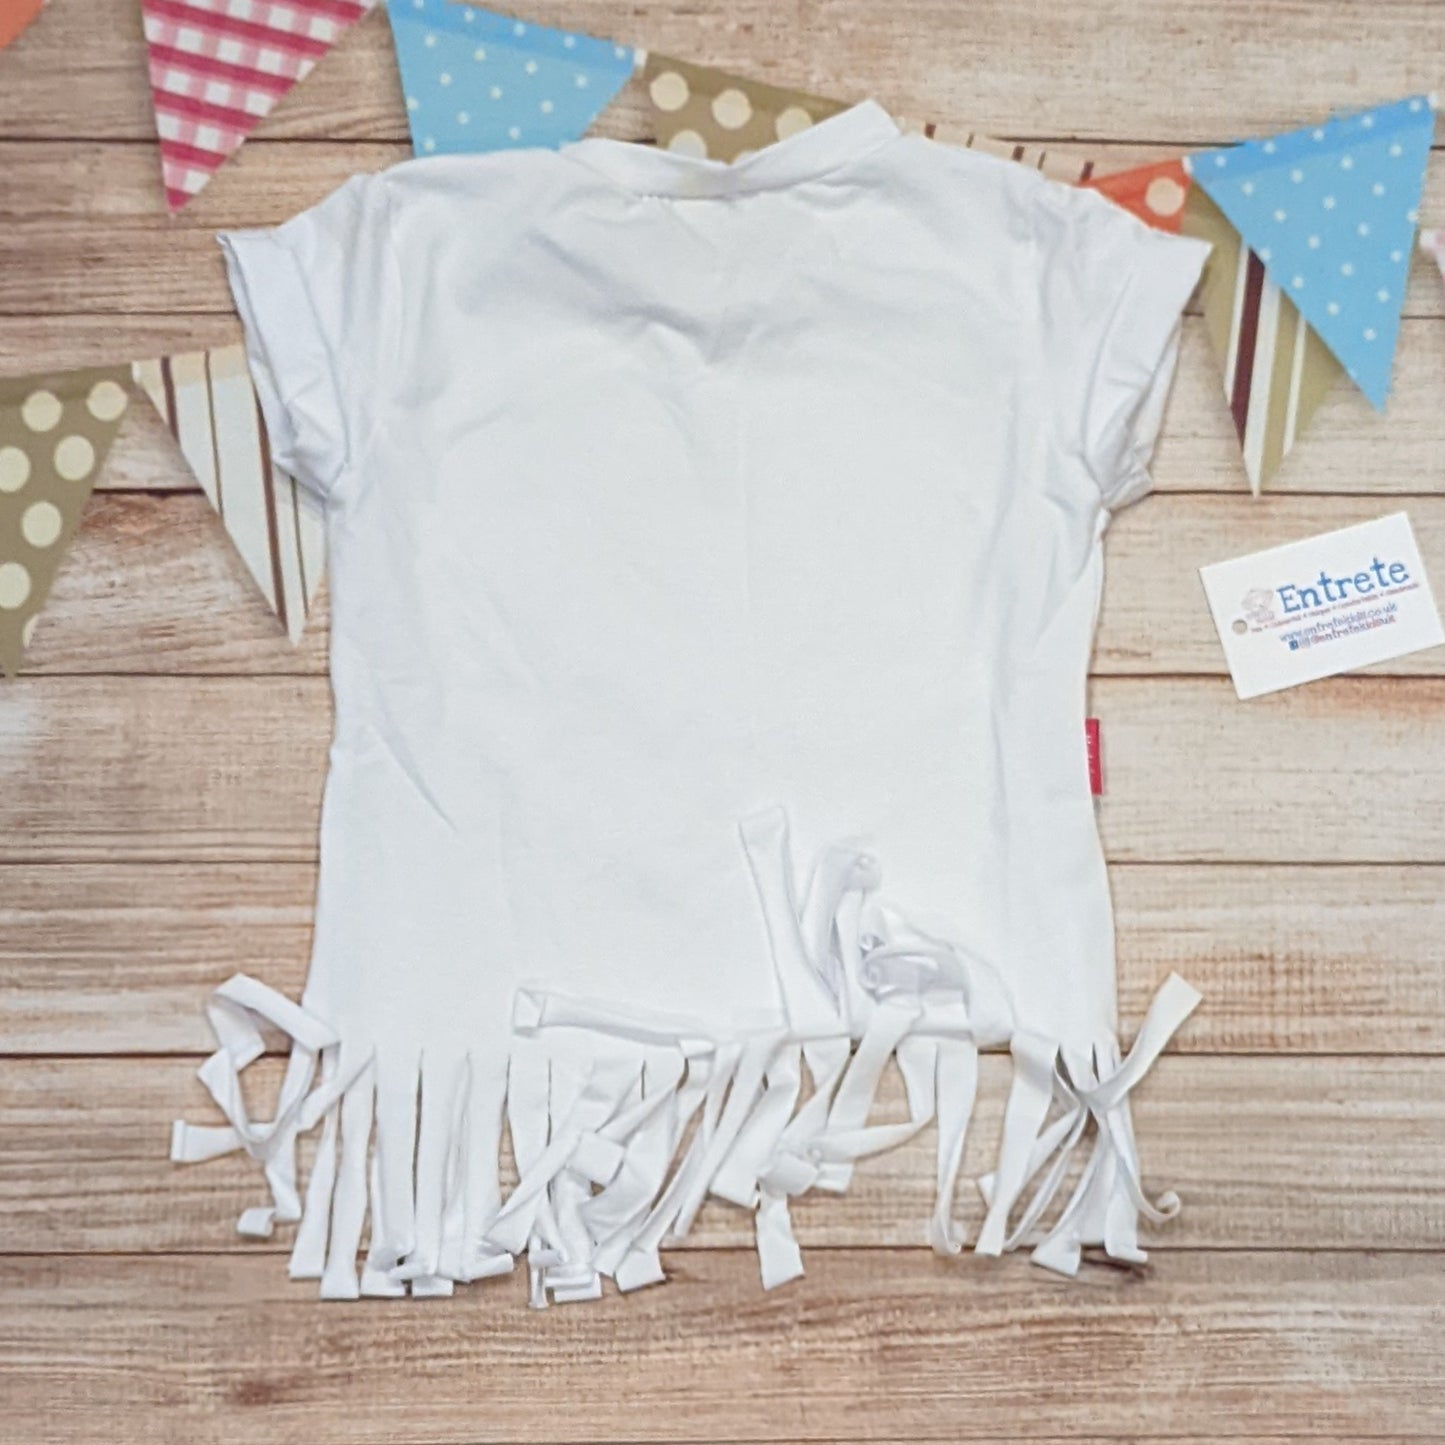 The feminine and beautiful mini rainbows heart tassel tee. Handmade using white and mini rainbows on white cotton jersey's, with white cotton ribbing. Shown from the rear.